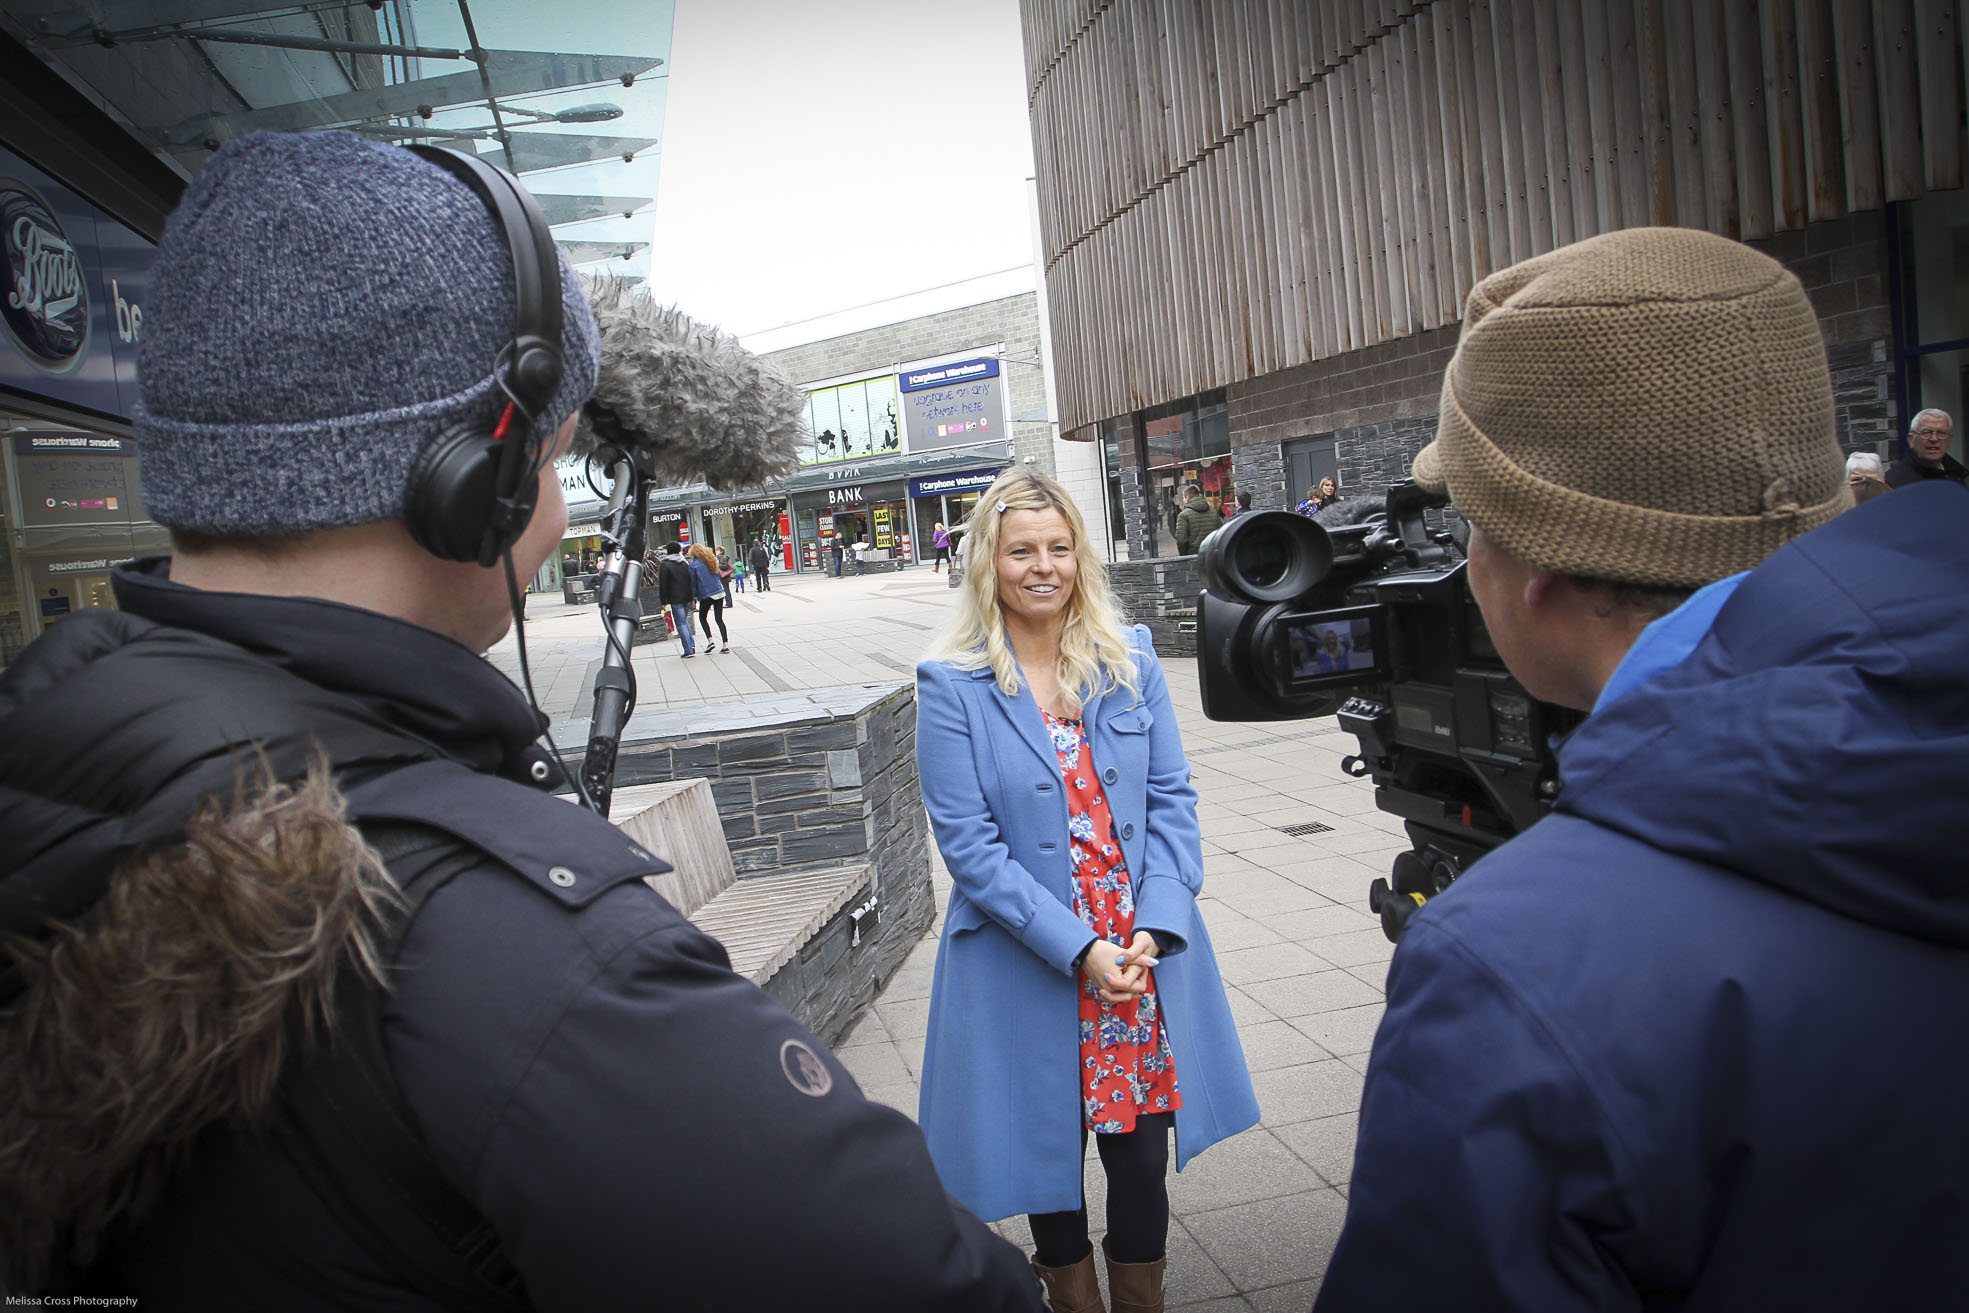 Shoppers to star in new Welsh learners’ TV show